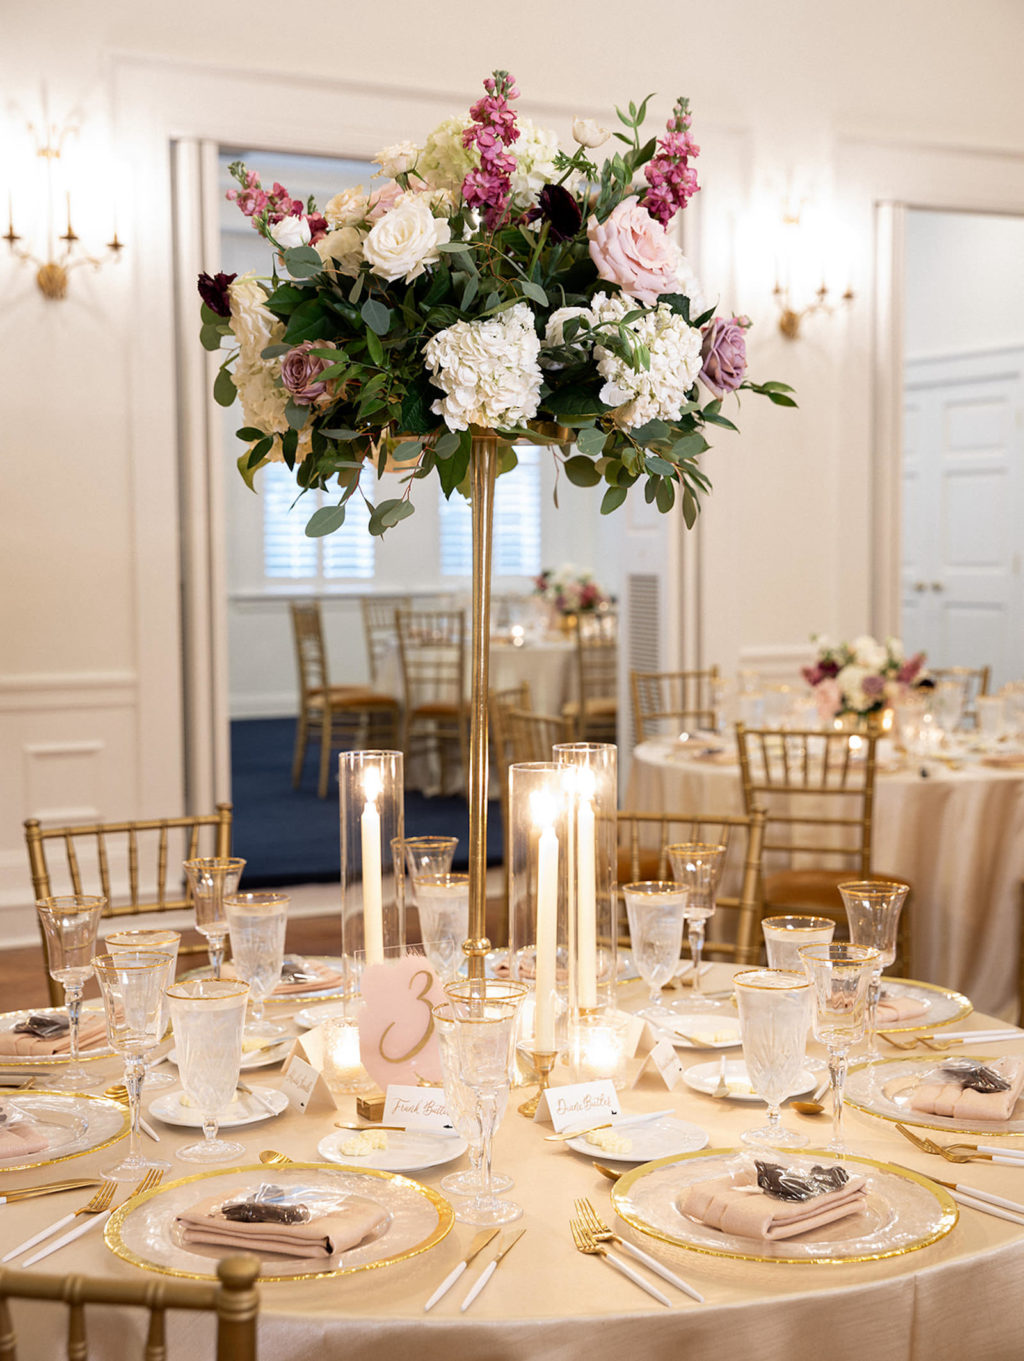 Classic Wedding Reception Decor, Champagne Table Linen, Gold Rimmed and Clear Glass Chargers, Bush Pink Linen Napkins, Tall Floral Centerpiece, White Hydrangeas, Mauve Roses, Greenery Eucalyptus | Tampa Bay Wedding Rentals Kate Ryan Event Rentals